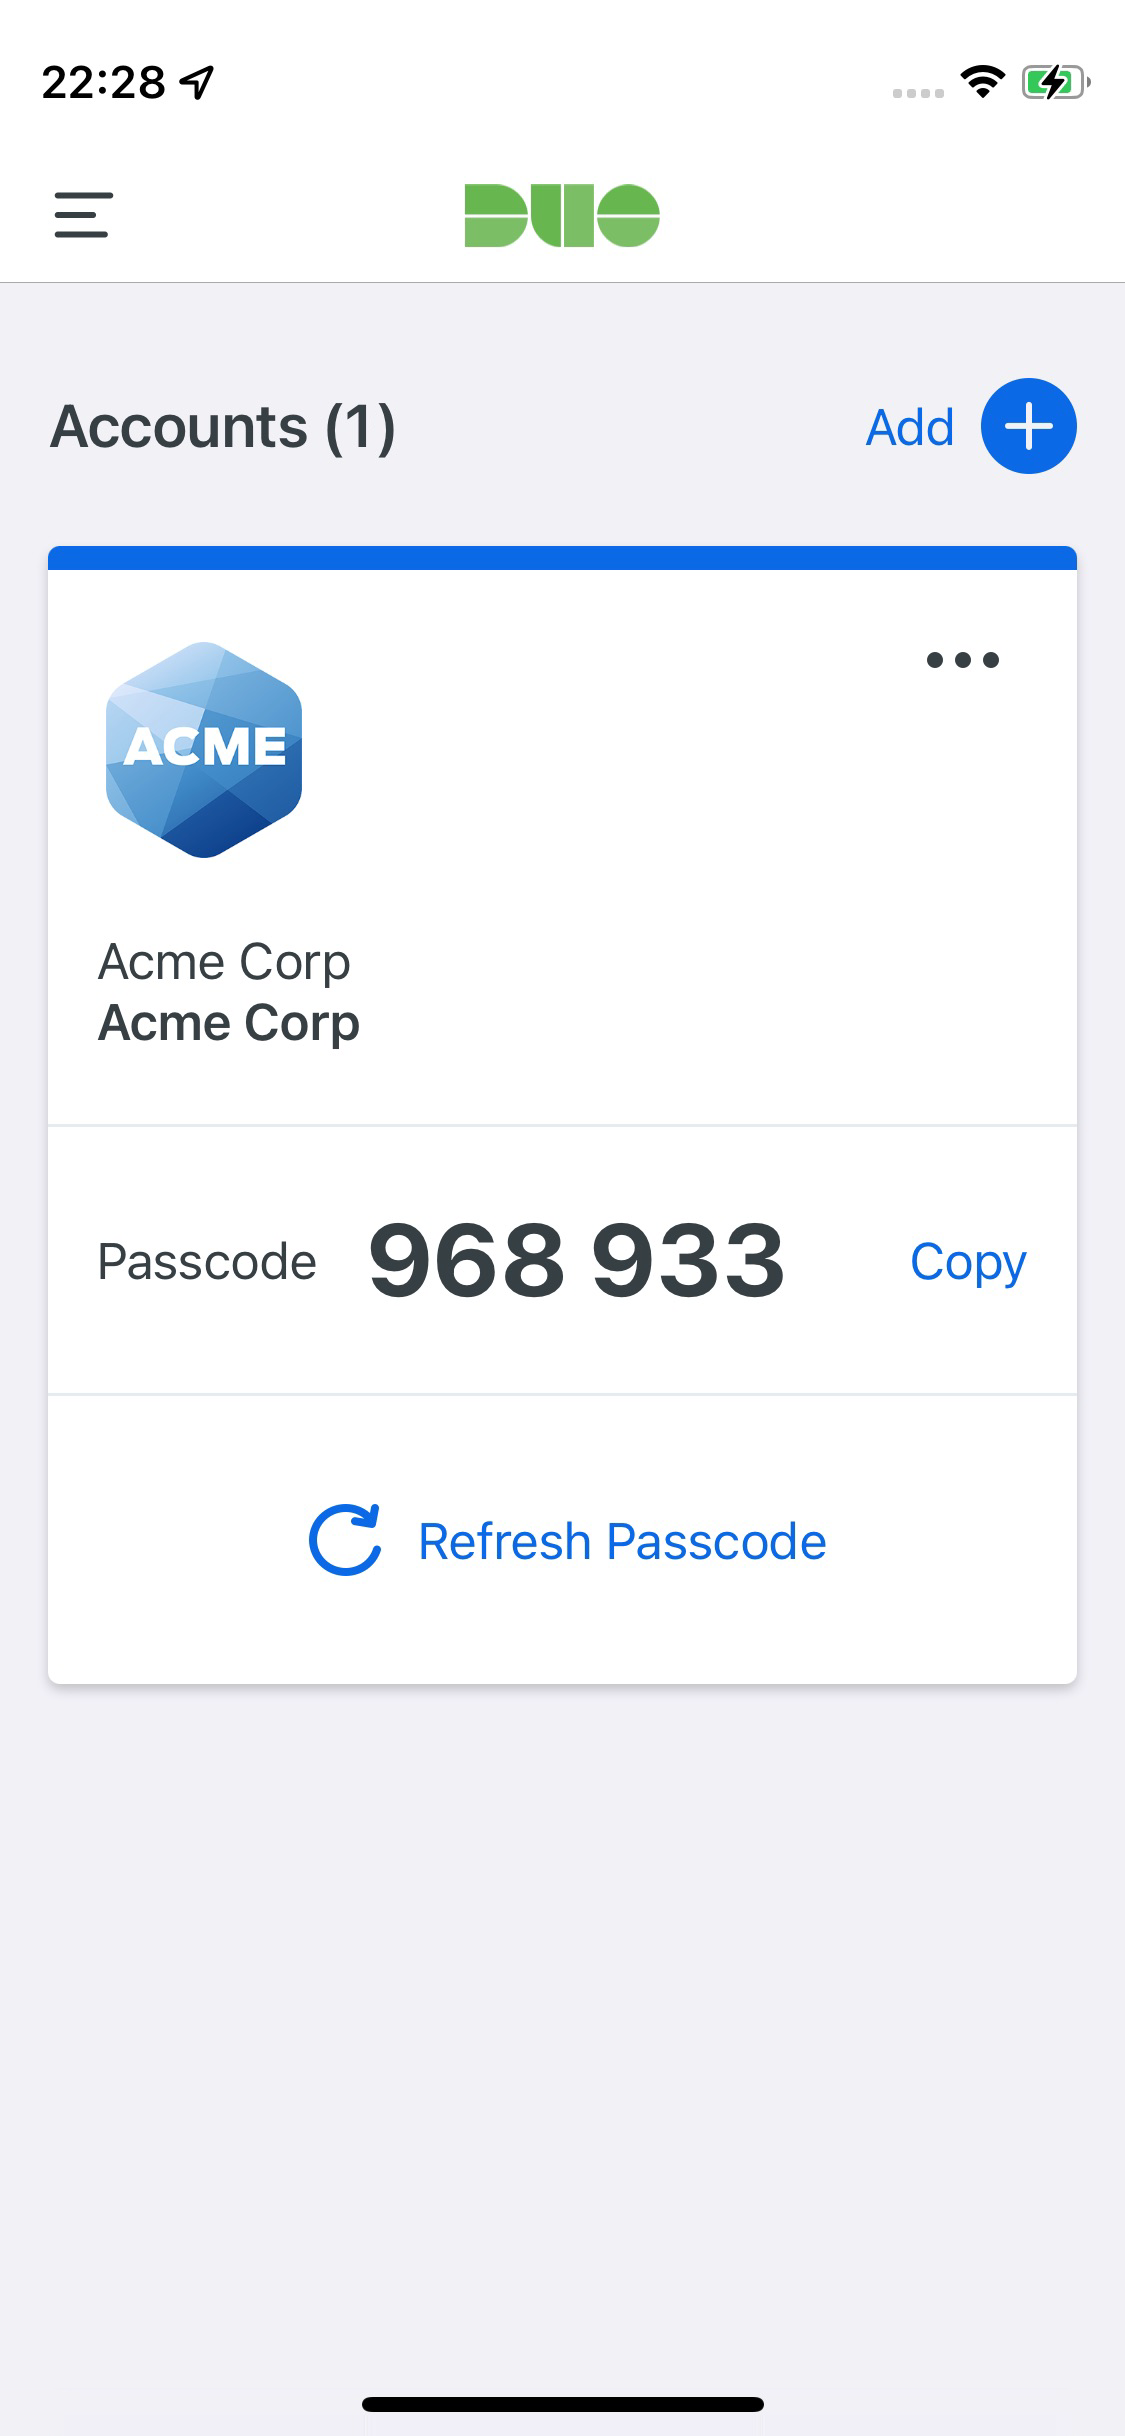 HOTP Passcode Generation in Duo Mobile